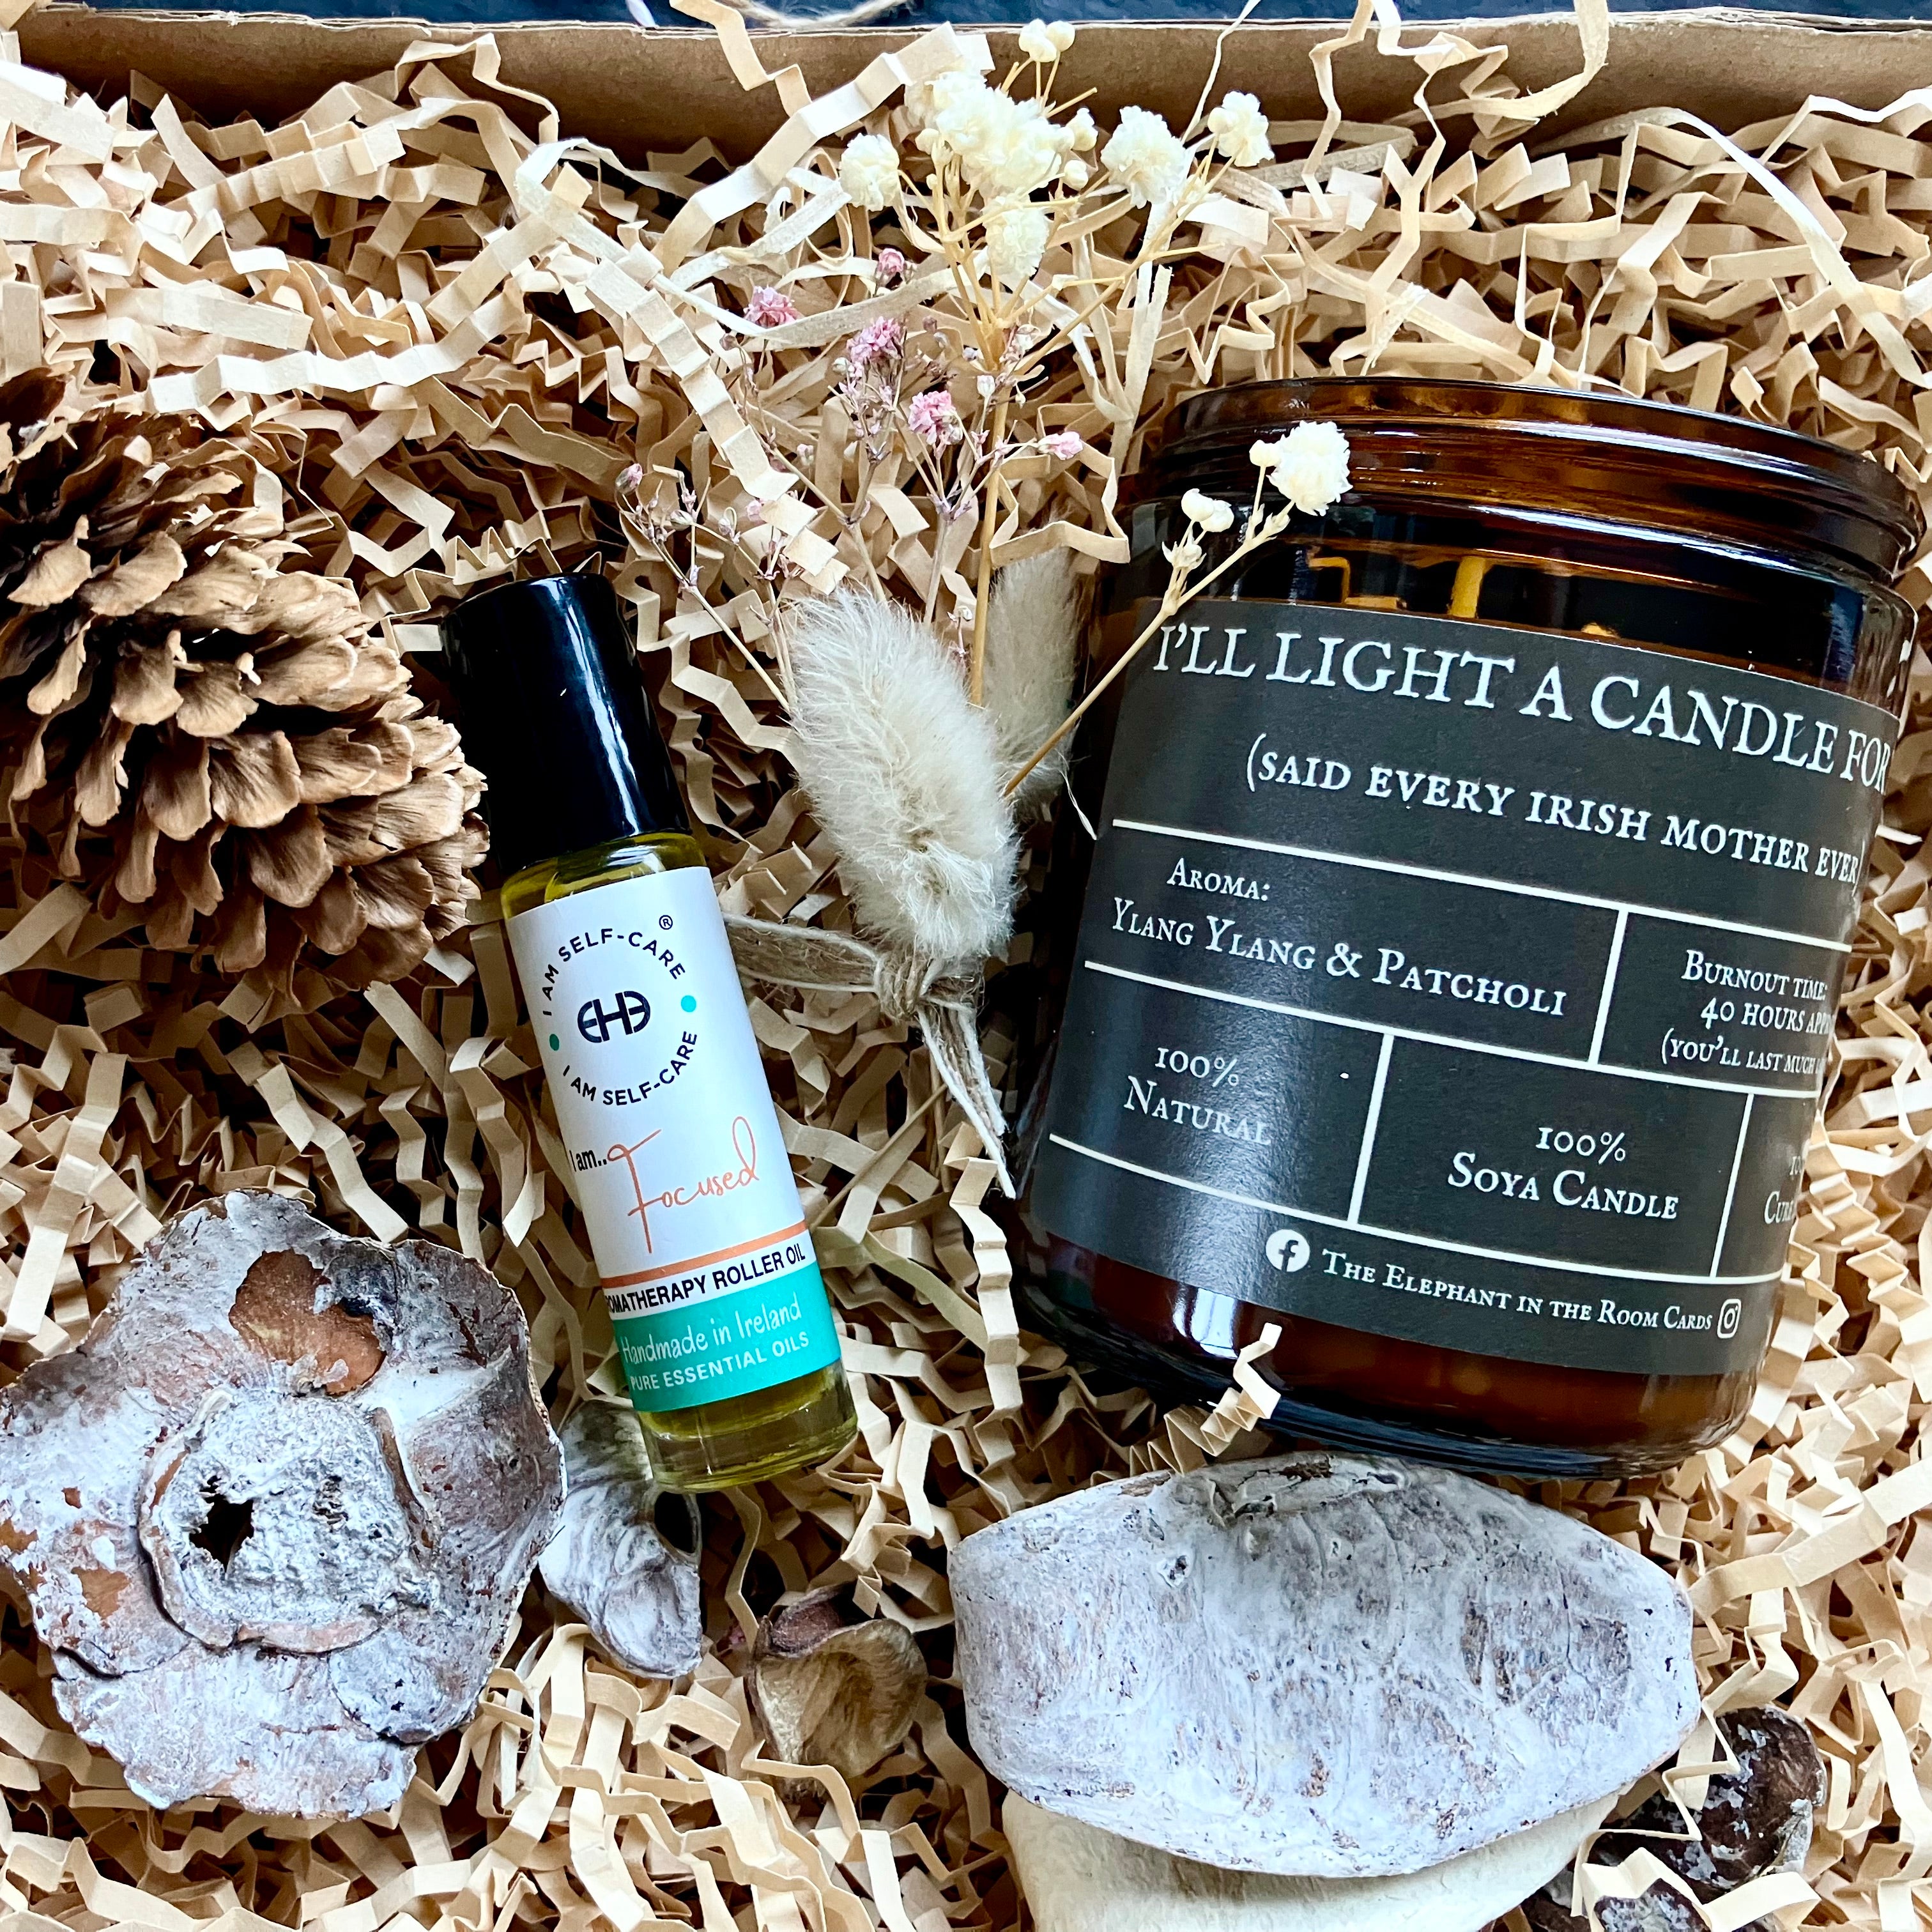 Care package with aromatherapy oil and candle